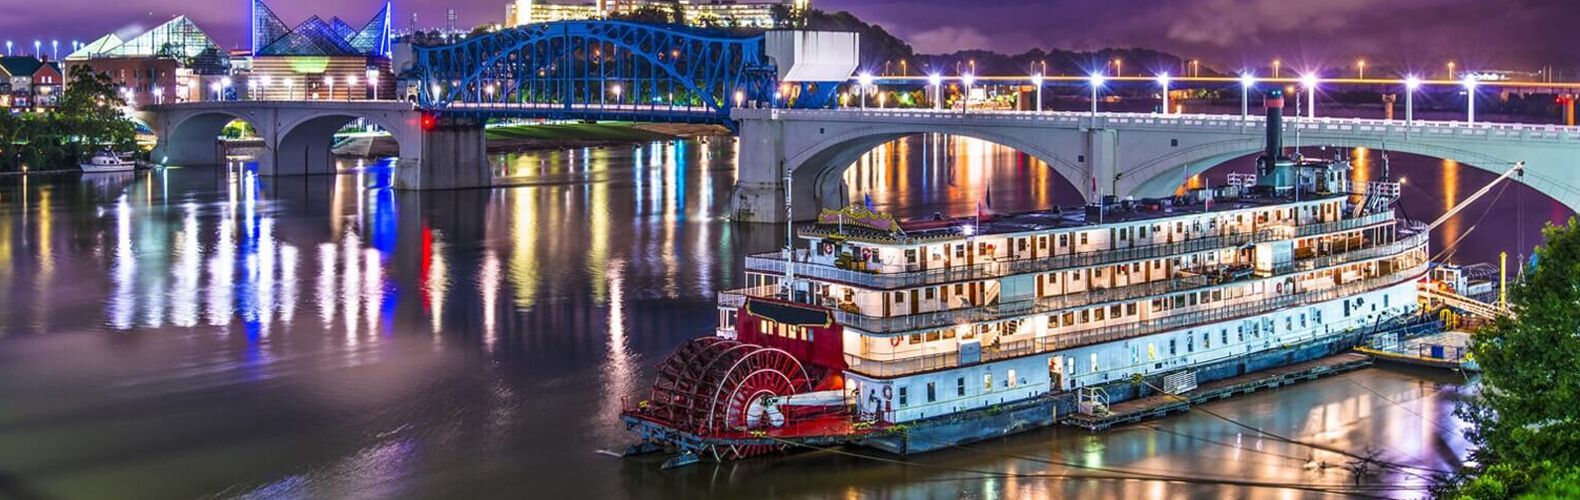 Chattanooga Web Design Company located in scenic city - picture of downtown at the river showing the riverboat and bridge